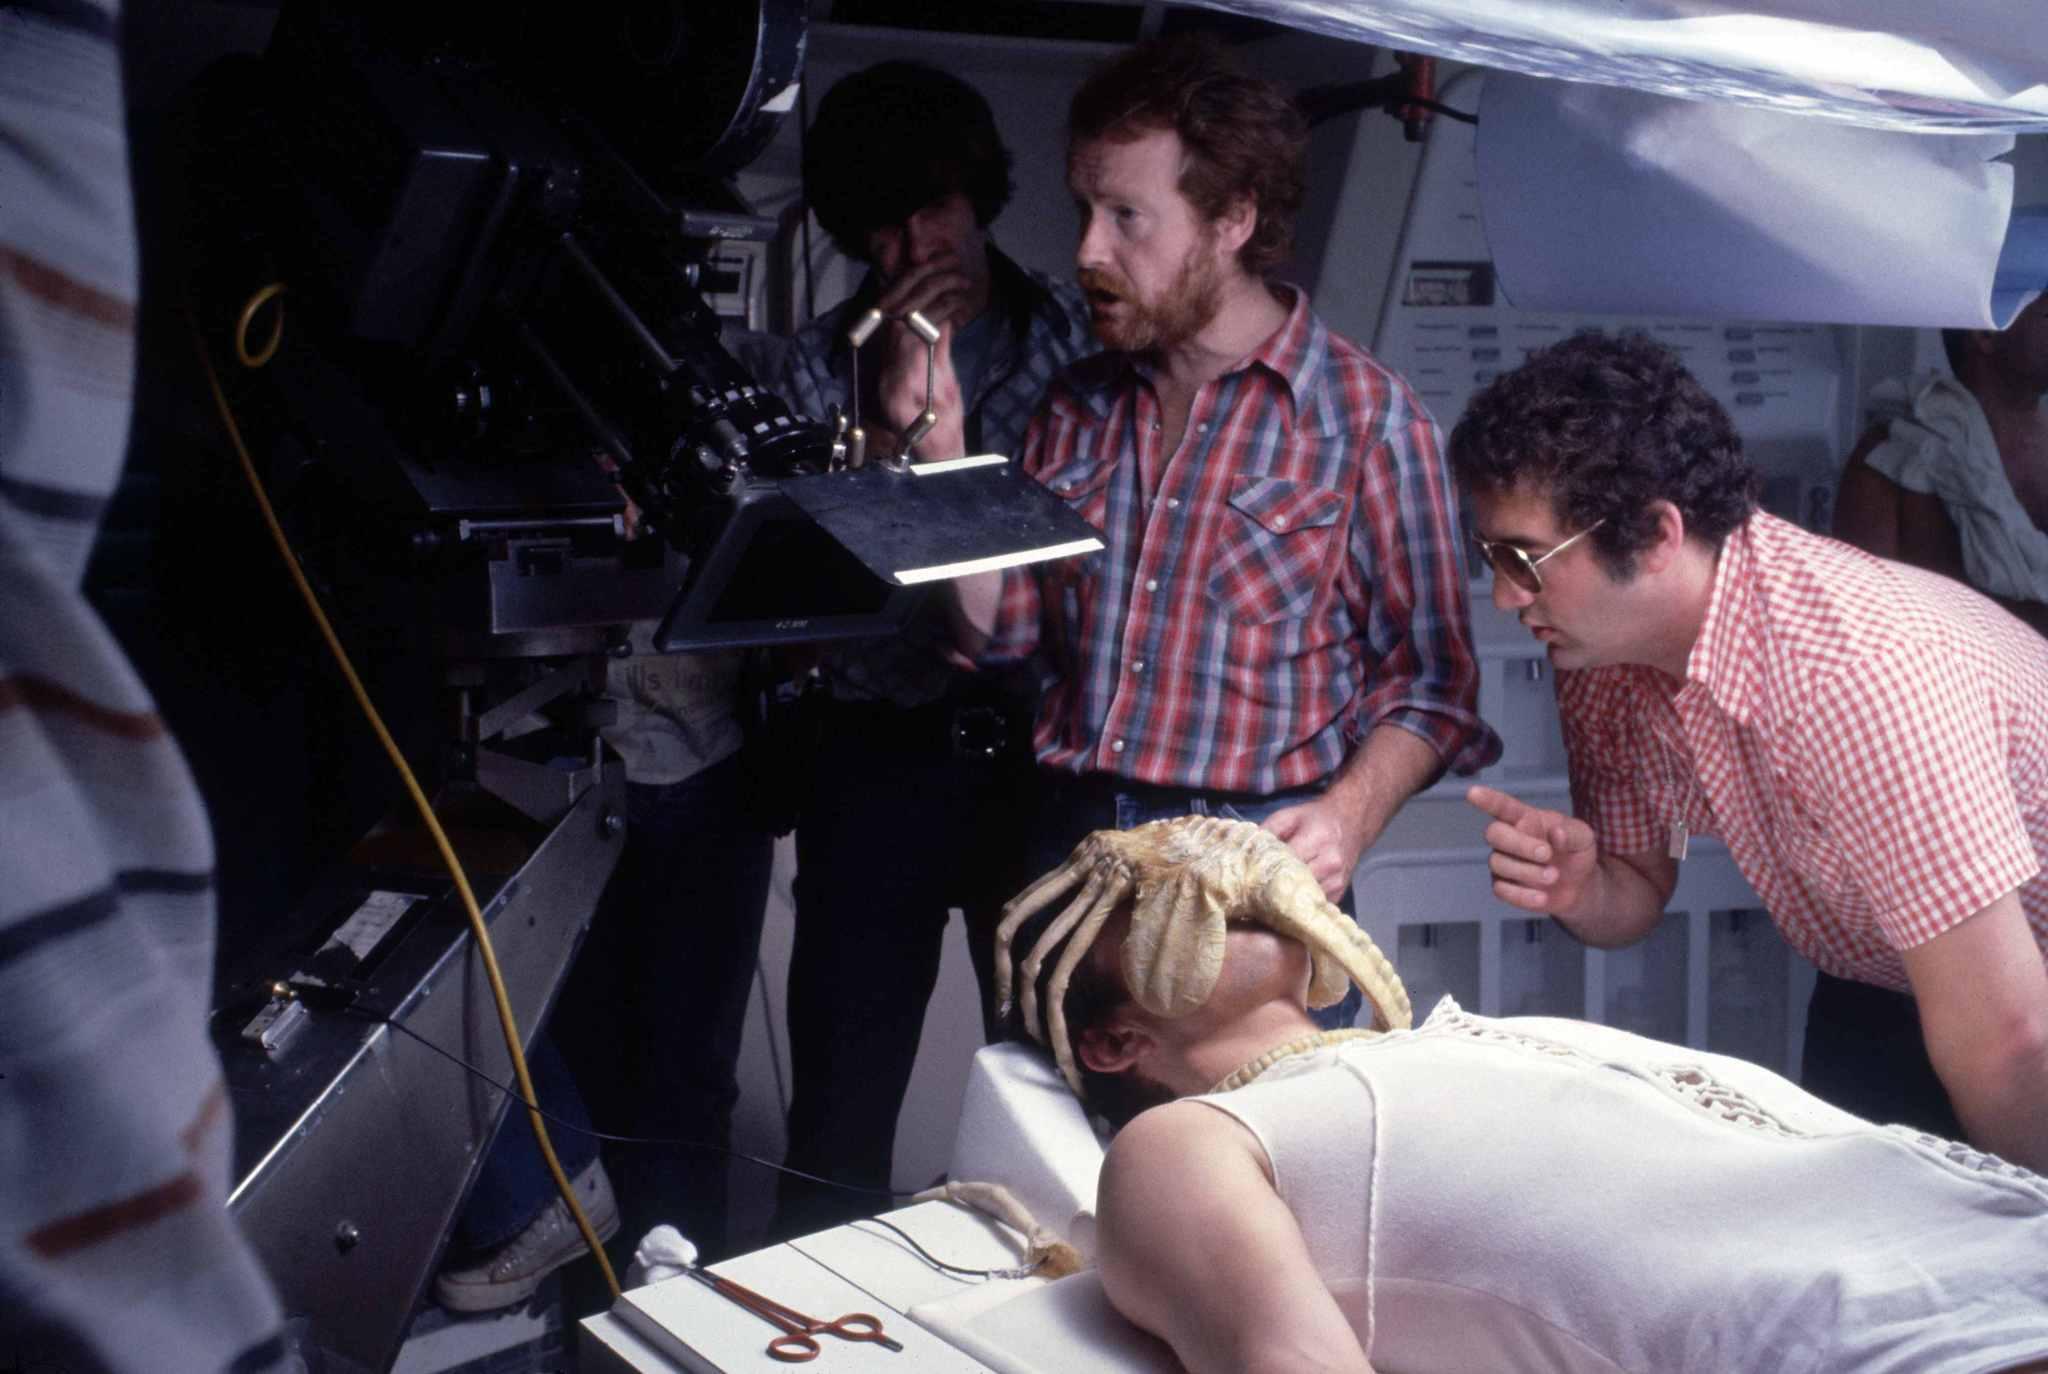 Ridley Scott reportedly said that originally he wanted a much darker ending. He planned on having the alien bite off Ripley's head in the escape shuttle, sit in her chair, and then start speaking with her voice in a message to Earth.